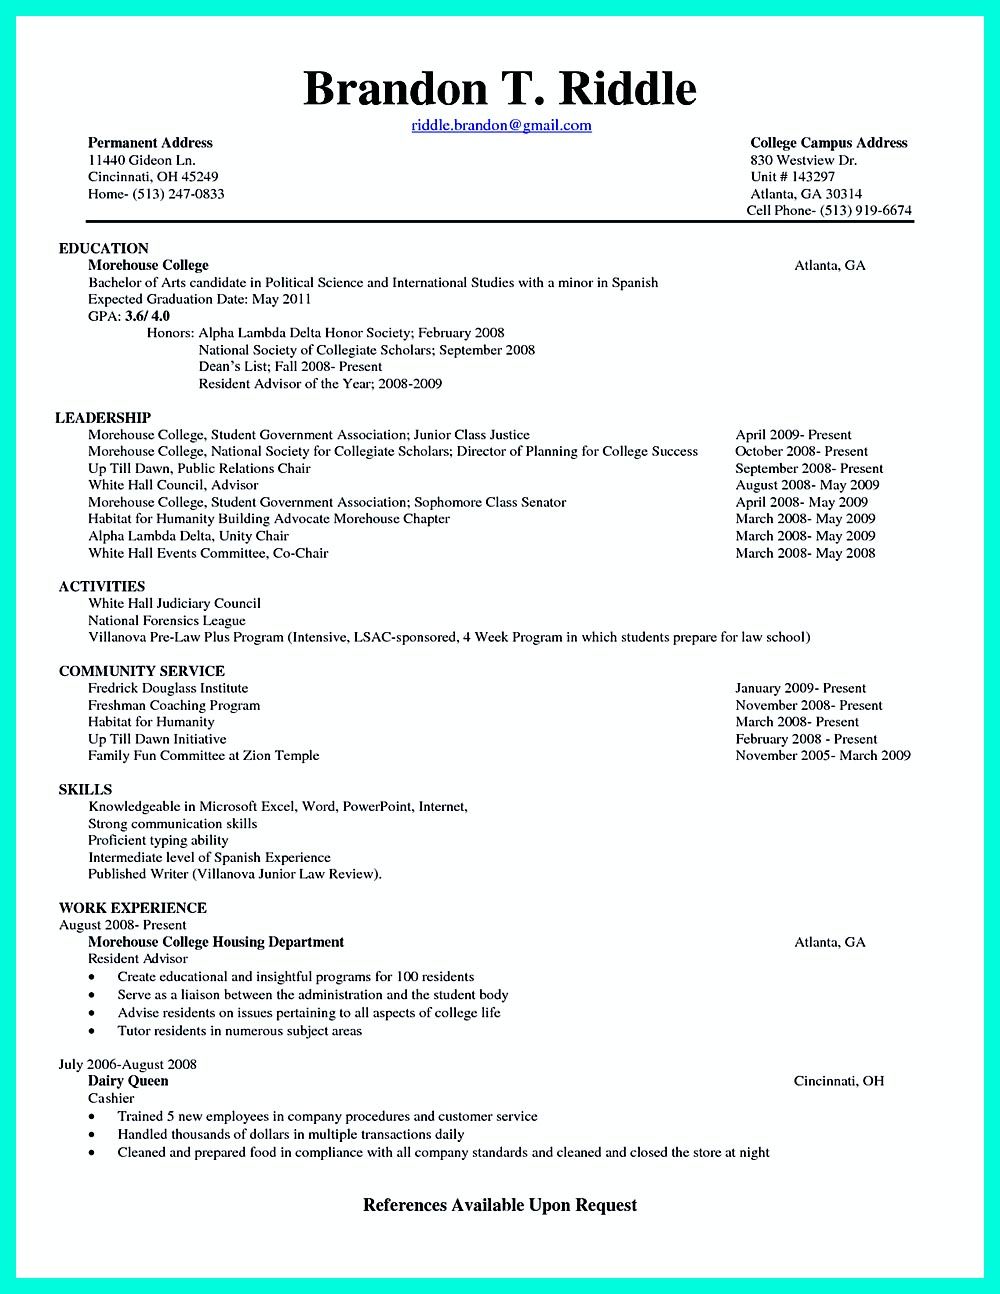 Current college student resume is designed for fresh ...